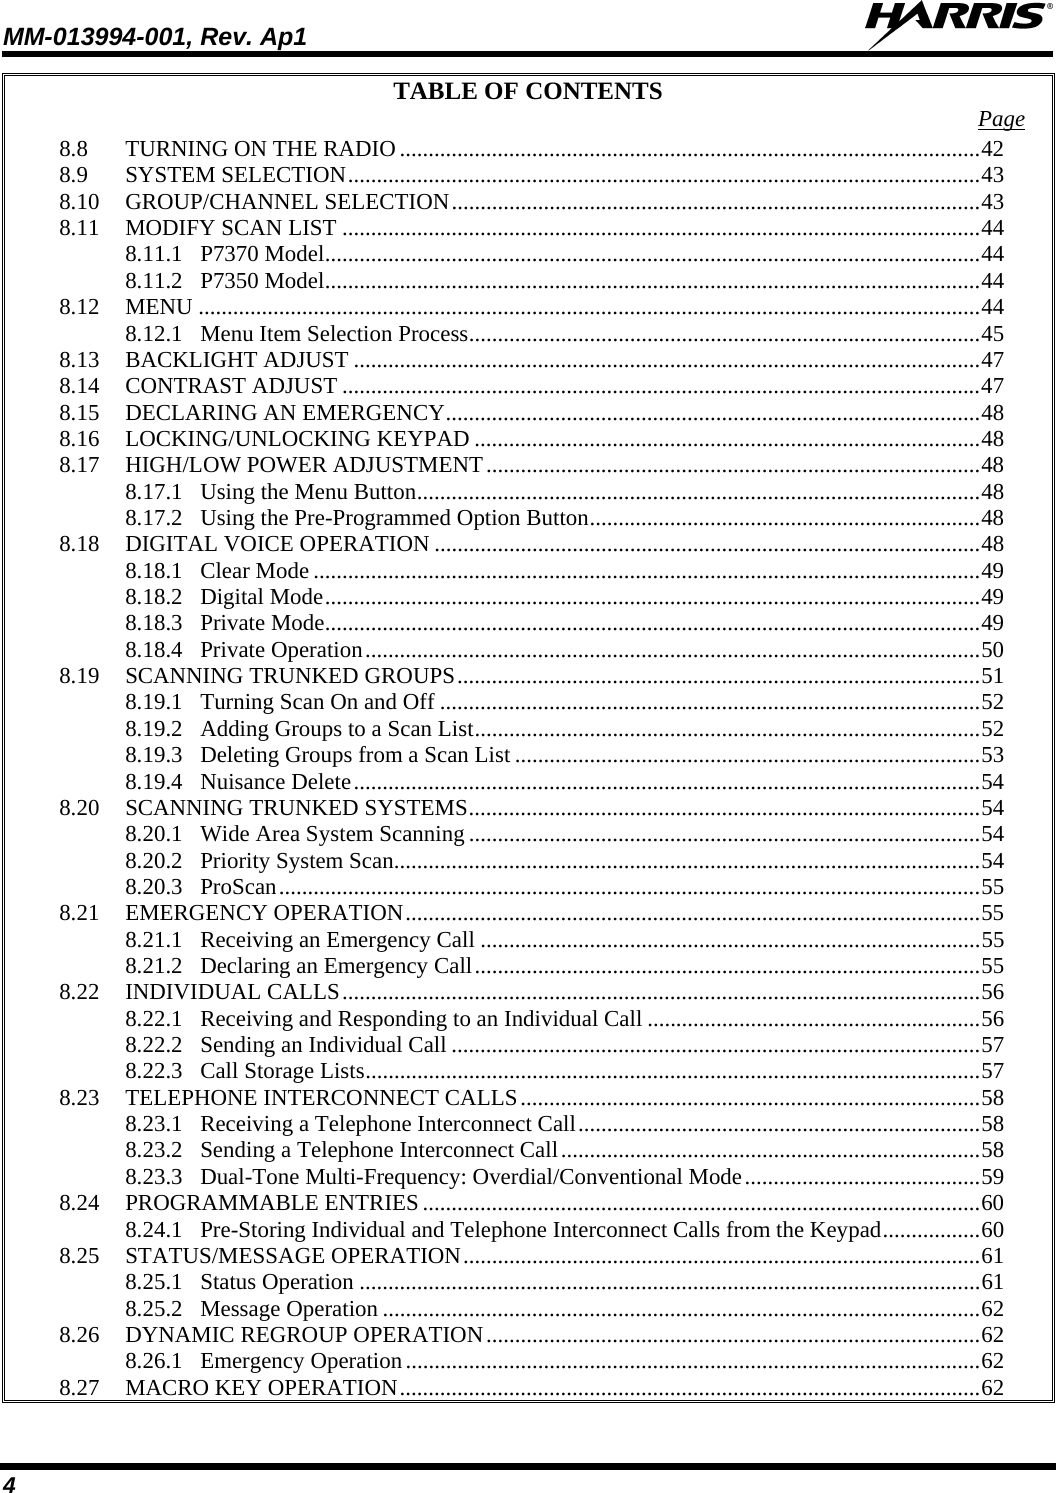 MM-013994-001, Rev. Ap1  4 TABLE OF CONTENTS  Page 8.8 TURNING ON THE RADIO .....................................................................................................42 8.9 SYSTEM SELECTION..............................................................................................................43 8.10 GROUP/CHANNEL SELECTION............................................................................................43 8.11 MODIFY SCAN LIST ...............................................................................................................44 8.11.1 P7370 Model..................................................................................................................44 8.11.2 P7350 Model..................................................................................................................44 8.12 MENU ........................................................................................................................................44 8.12.1 Menu Item Selection Process.........................................................................................45 8.13 BACKLIGHT ADJUST .............................................................................................................47 8.14 CONTRAST ADJUST ...............................................................................................................47 8.15 DECLARING AN EMERGENCY.............................................................................................48 8.16 LOCKING/UNLOCKING KEYPAD ........................................................................................48 8.17 HIGH/LOW POWER ADJUSTMENT......................................................................................48 8.17.1 Using the Menu Button..................................................................................................48 8.17.2 Using the Pre-Programmed Option Button....................................................................48 8.18 DIGITAL VOICE OPERATION ...............................................................................................48 8.18.1 Clear Mode ....................................................................................................................49 8.18.2 Digital Mode..................................................................................................................49 8.18.3 Private Mode..................................................................................................................49 8.18.4 Private Operation...........................................................................................................50 8.19 SCANNING TRUNKED GROUPS...........................................................................................51 8.19.1 Turning Scan On and Off ..............................................................................................52 8.19.2 Adding Groups to a Scan List........................................................................................52 8.19.3 Deleting Groups from a Scan List .................................................................................53 8.19.4 Nuisance Delete.............................................................................................................54 8.20 SCANNING TRUNKED SYSTEMS.........................................................................................54 8.20.1 Wide Area System Scanning .........................................................................................54 8.20.2 Priority System Scan......................................................................................................54 8.20.3 ProScan..........................................................................................................................55 8.21 EMERGENCY OPERATION....................................................................................................55 8.21.1 Receiving an Emergency Call .......................................................................................55 8.21.2 Declaring an Emergency Call........................................................................................55 8.22 INDIVIDUAL CALLS...............................................................................................................56 8.22.1 Receiving and Responding to an Individual Call ..........................................................56 8.22.2 Sending an Individual Call ............................................................................................57 8.22.3 Call Storage Lists...........................................................................................................57 8.23 TELEPHONE INTERCONNECT CALLS................................................................................58 8.23.1 Receiving a Telephone Interconnect Call......................................................................58 8.23.2 Sending a Telephone Interconnect Call.........................................................................58 8.23.3 Dual-Tone Multi-Frequency: Overdial/Conventional Mode.........................................59 8.24 PROGRAMMABLE ENTRIES .................................................................................................60 8.24.1 Pre-Storing Individual and Telephone Interconnect Calls from the Keypad.................60 8.25 STATUS/MESSAGE OPERATION..........................................................................................61 8.25.1 Status Operation ............................................................................................................61 8.25.2 Message Operation ........................................................................................................62 8.26 DYNAMIC REGROUP OPERATION......................................................................................62 8.26.1 Emergency Operation....................................................................................................62 8.27 MACRO KEY OPERATION.....................................................................................................62 